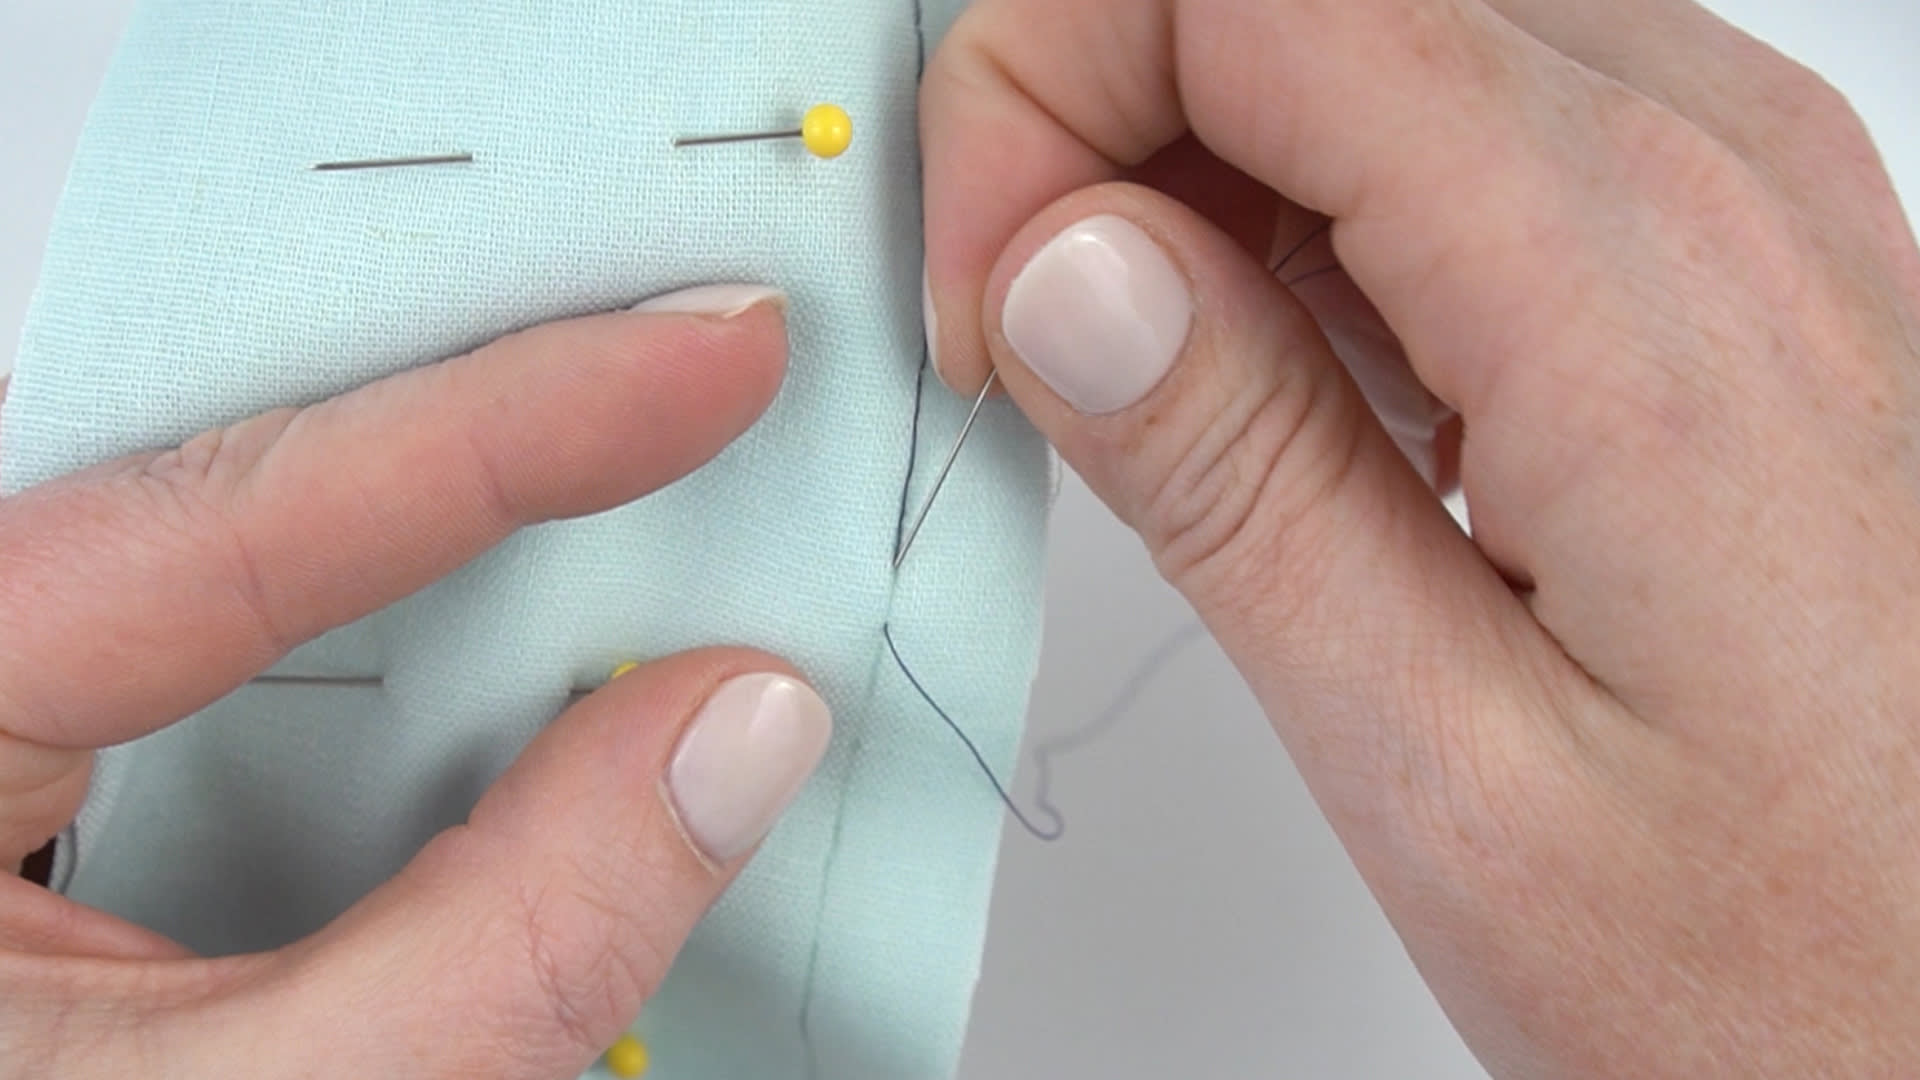 Sewing Basics : How to Use Invisible Sewing Thread 